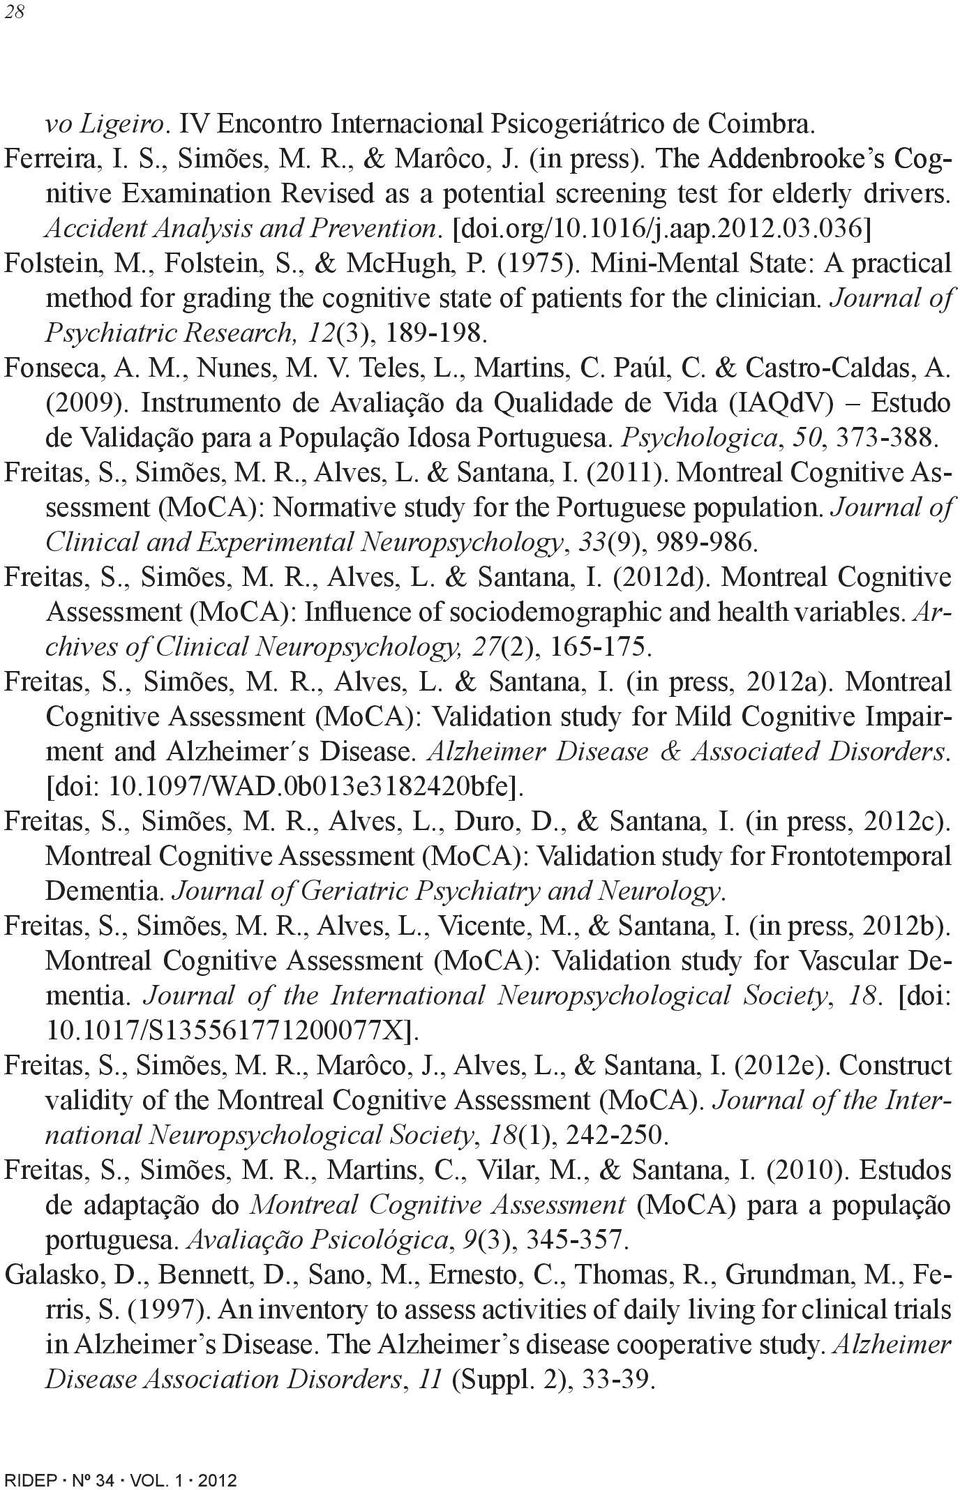 , & McHugh, P. (1975). Mini-Mental State: A practical method for grading the cognitive state of patients for the clinician. Journal of Psychiatric Research, 12(3), 189-198. Fonseca, A. M., Nunes, M.